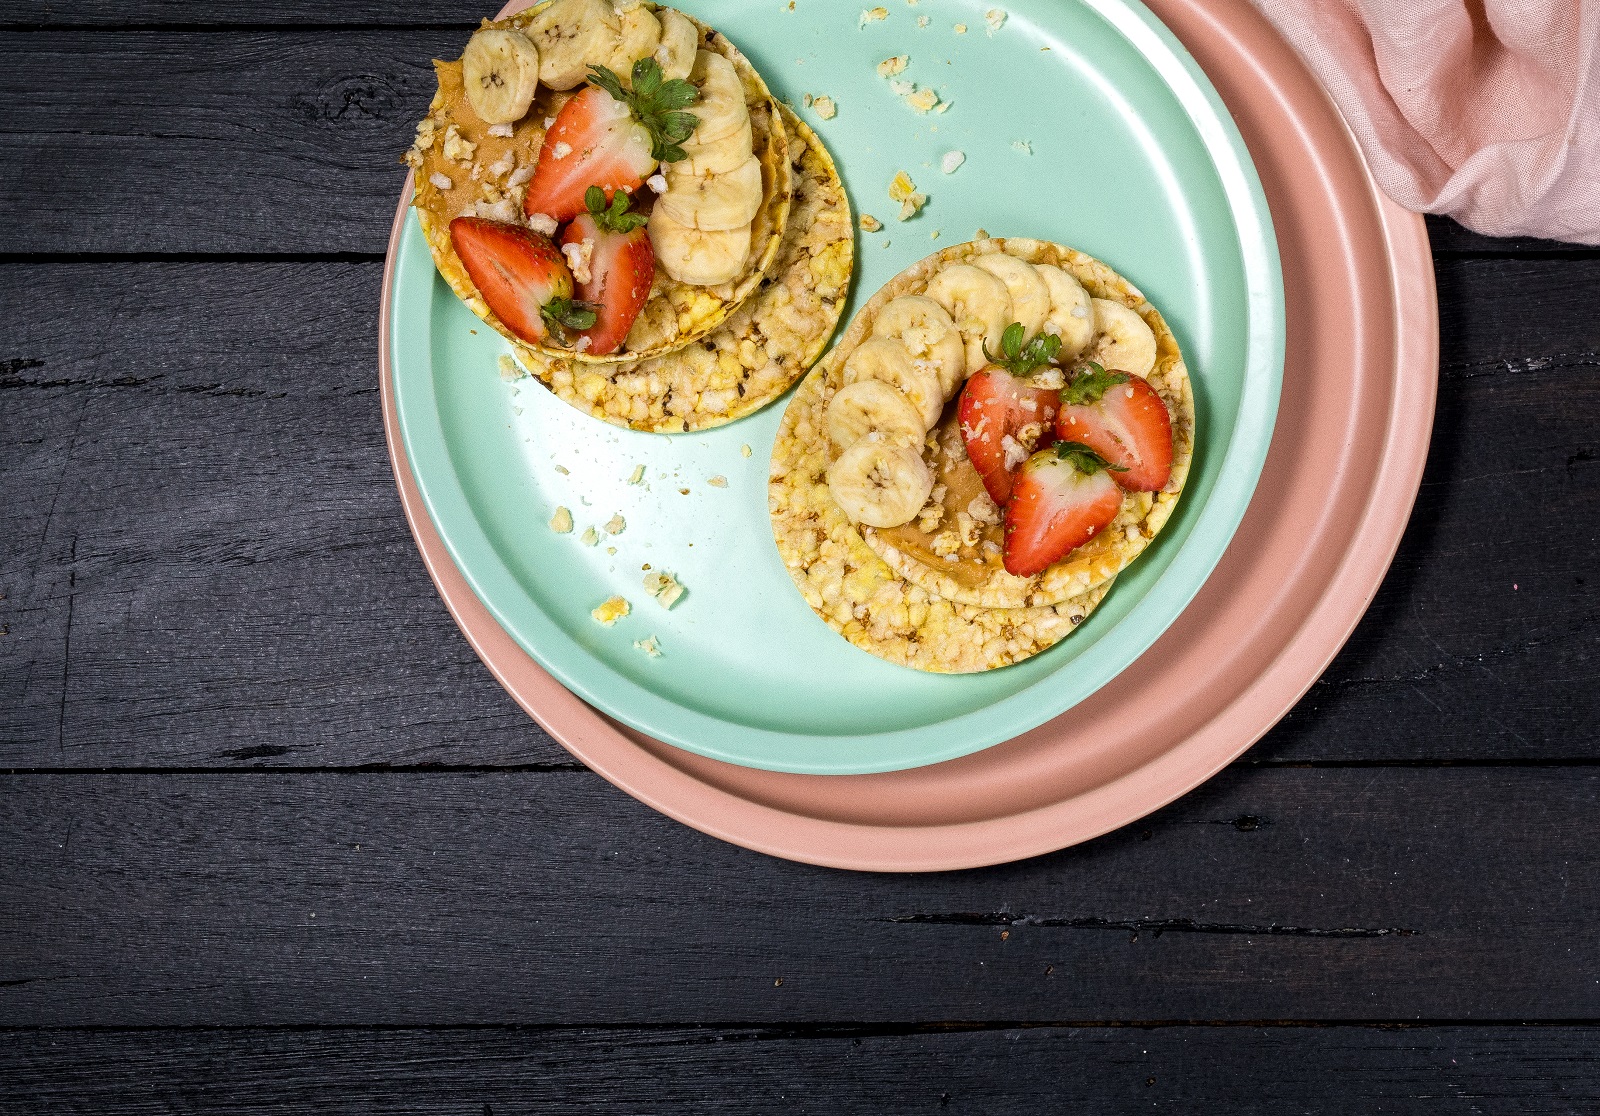 Peanut Butter, Strawberry & Banana on CORN THINS slices